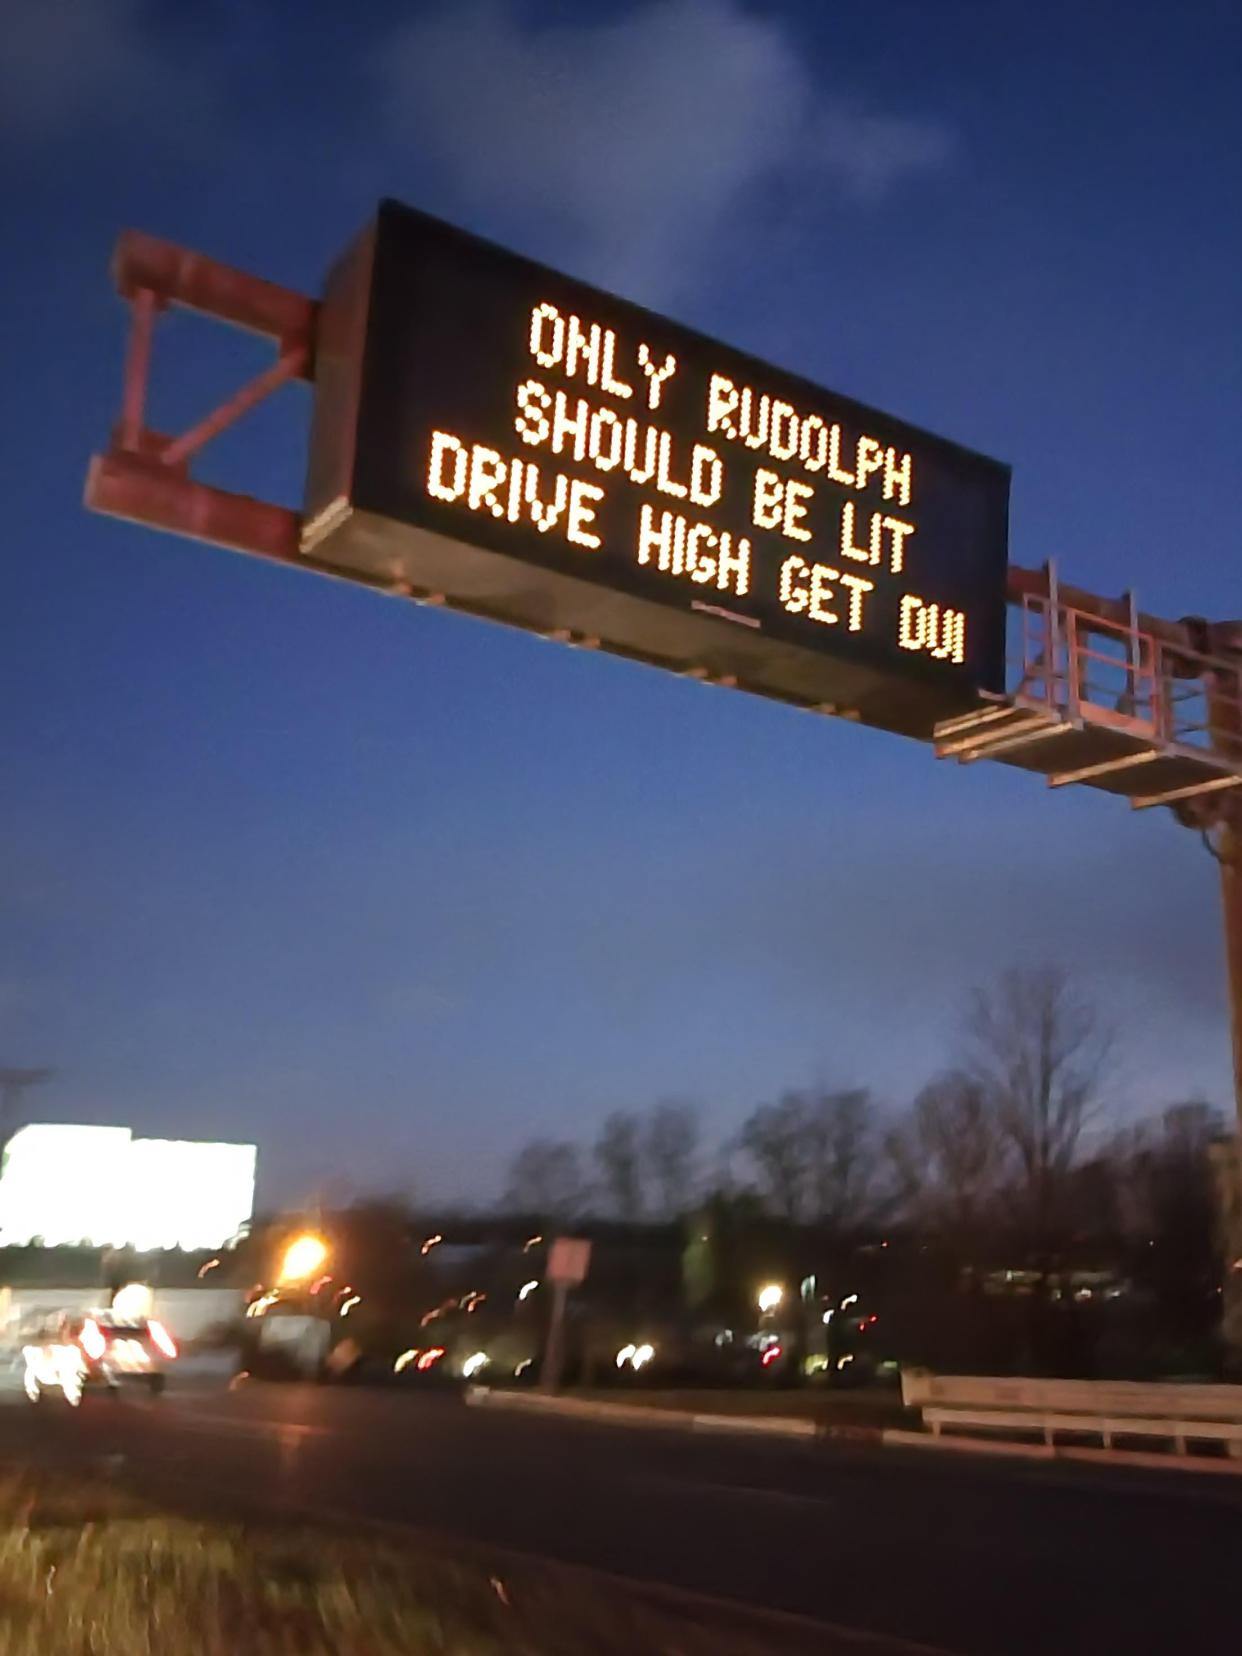 The New Jersey Department of Transportation is back in the entertainment business with the state's message sign boards, using humor in warnings against reckless and distracted driving for the 2023 holiday season.